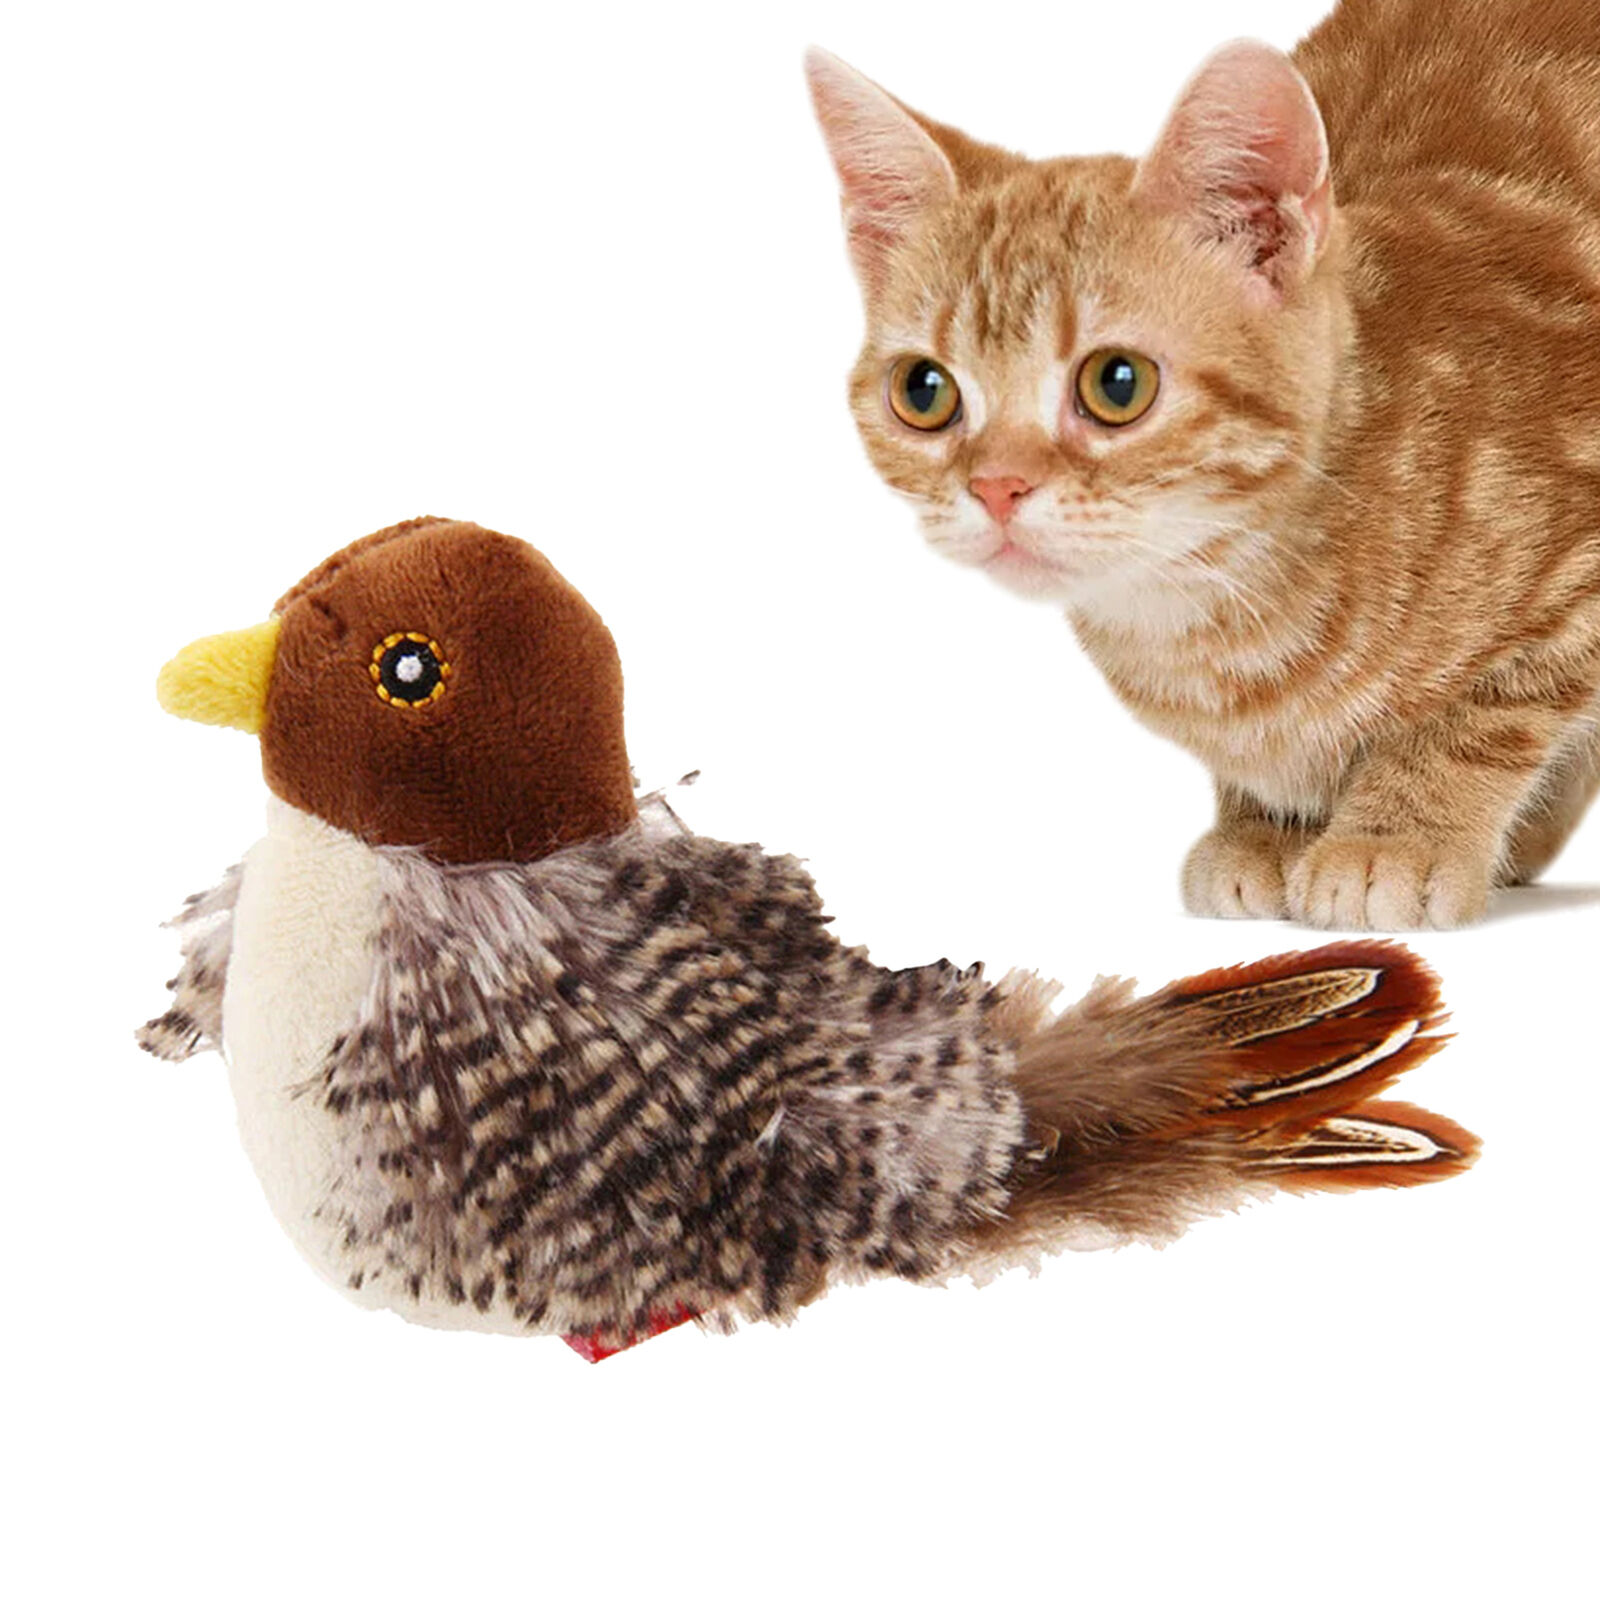 Simulation Bird Interactive Cat Toy, Sounds And Flapping Movements For Exercise